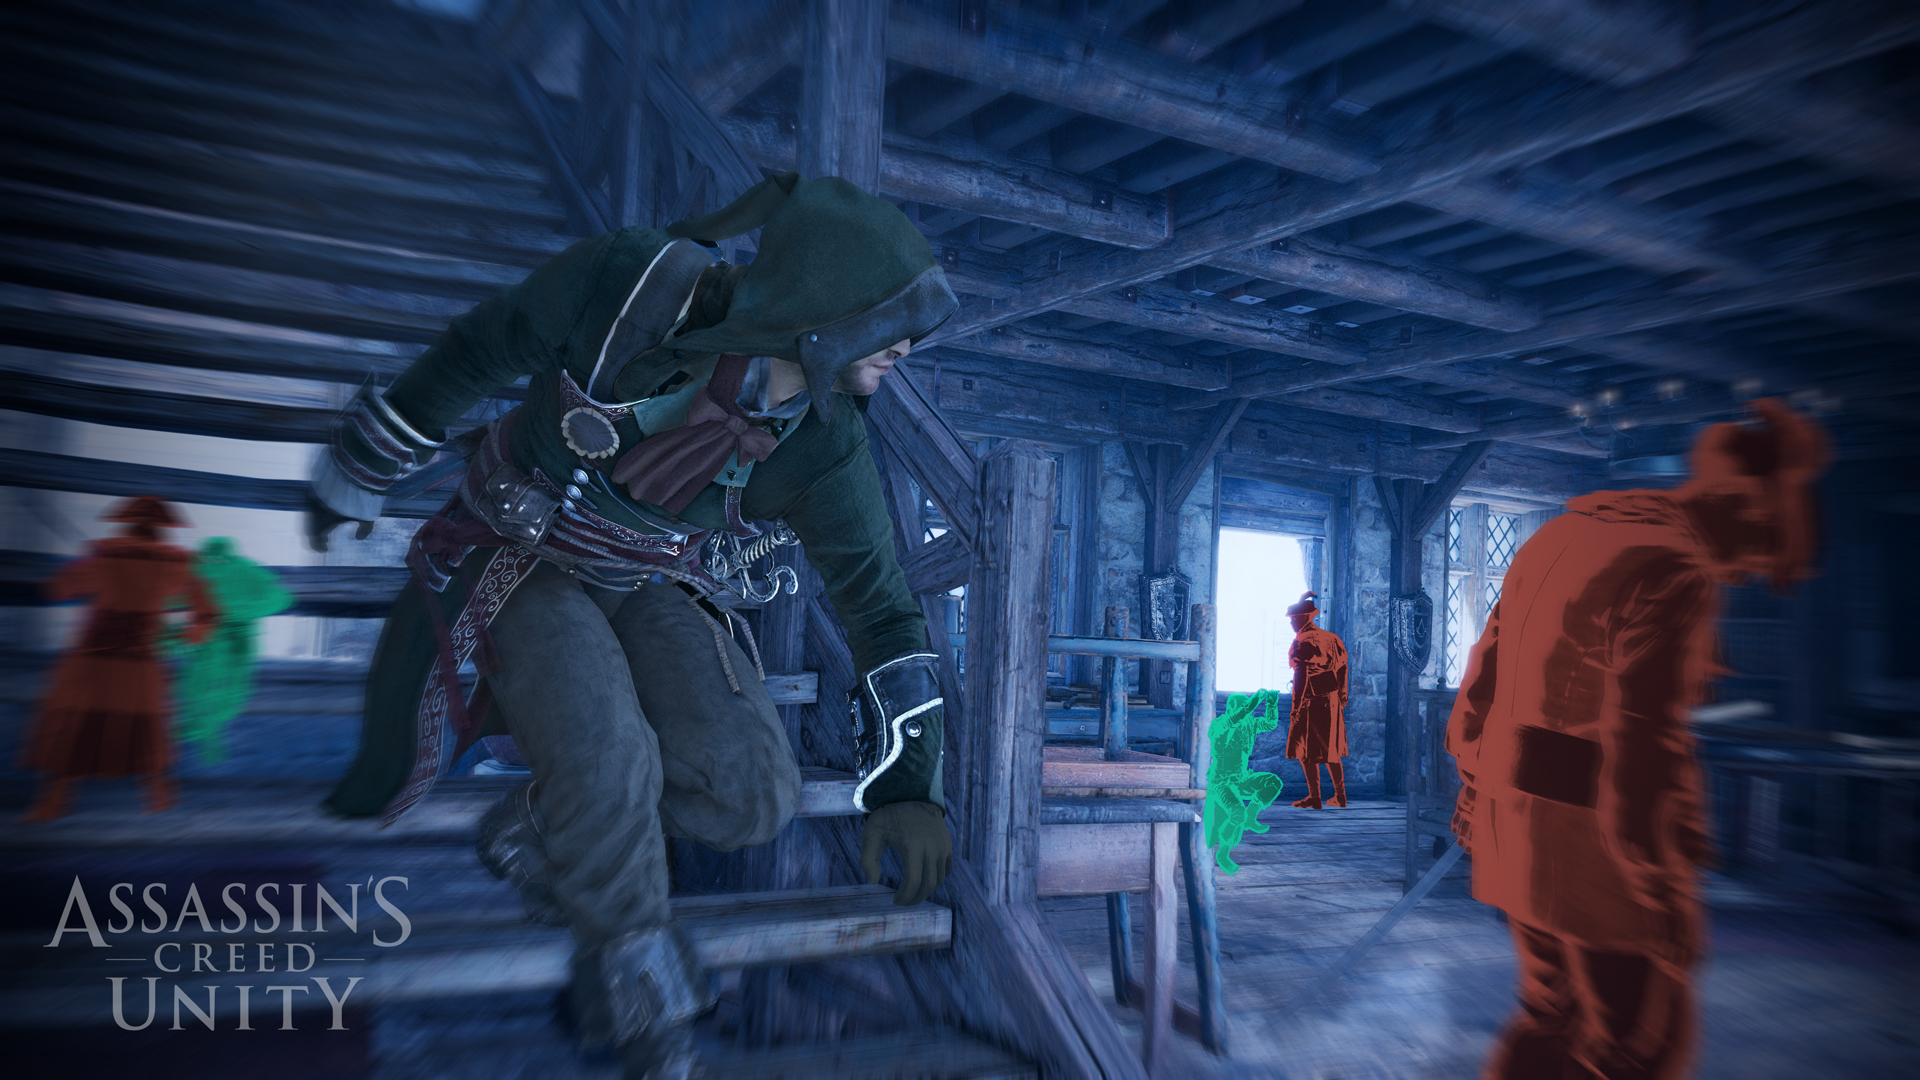 Assassin's Creed Unity Gallery #1